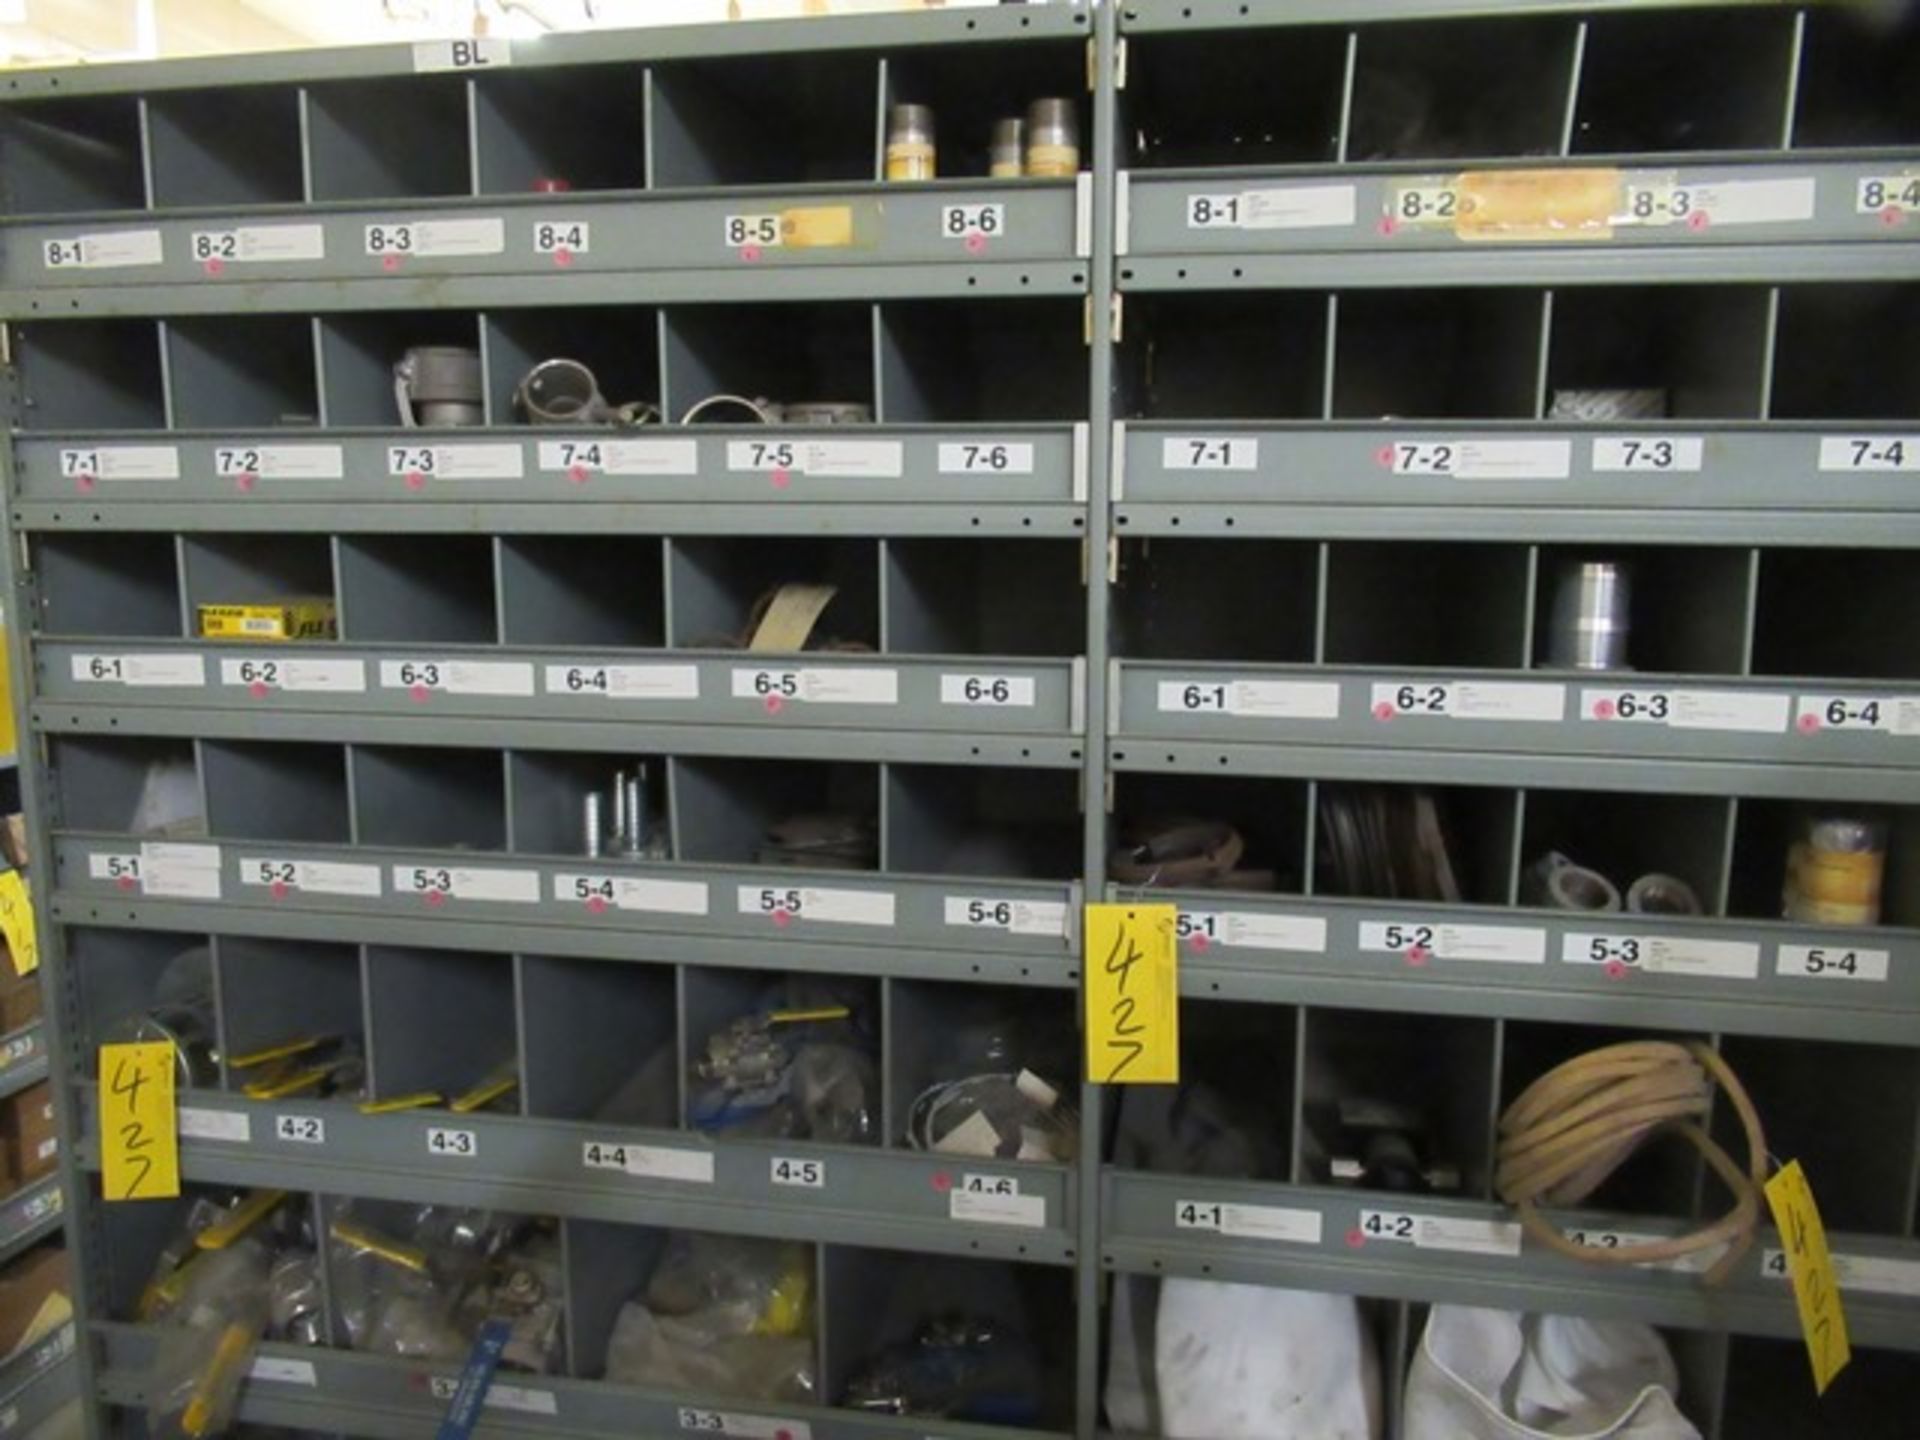 LOT ASST. CF, VELAN, APOLLO, FNW VALVES, FLOW SWITCHES, FITTINGS, COUPLINGS, ETC. 2-SECTIONS OF